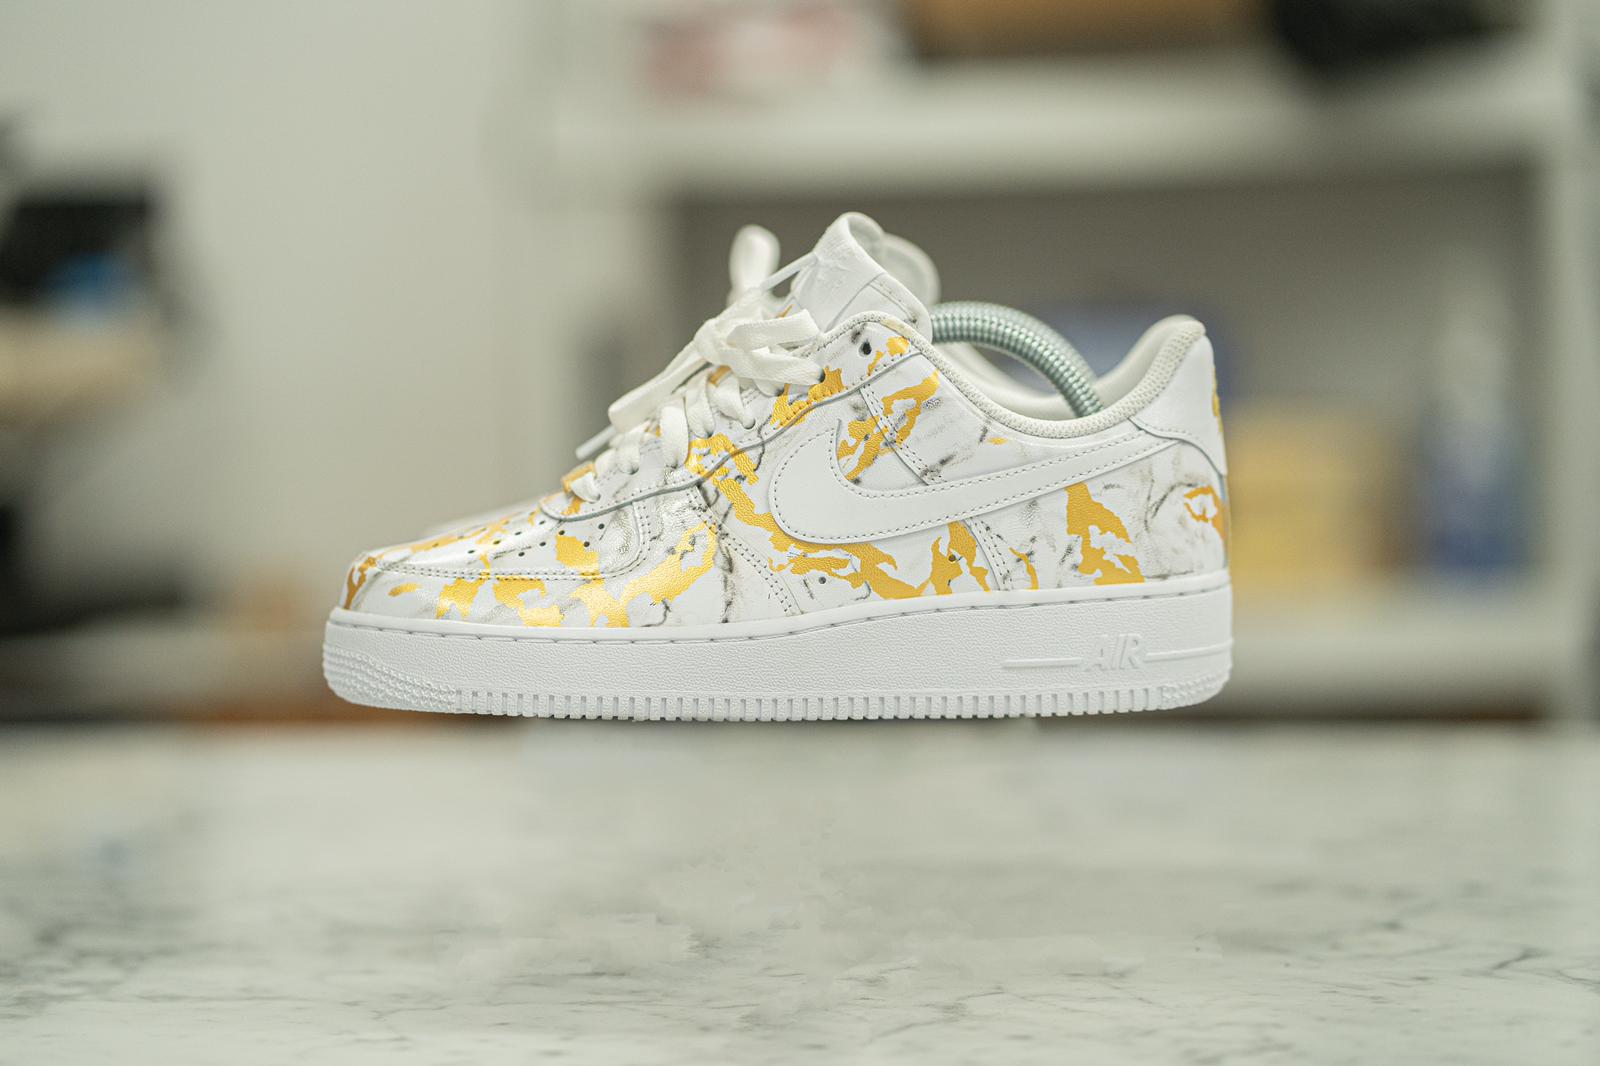 Custom Hand Painted Gold and Black Marble Nike Air Force 1 Low